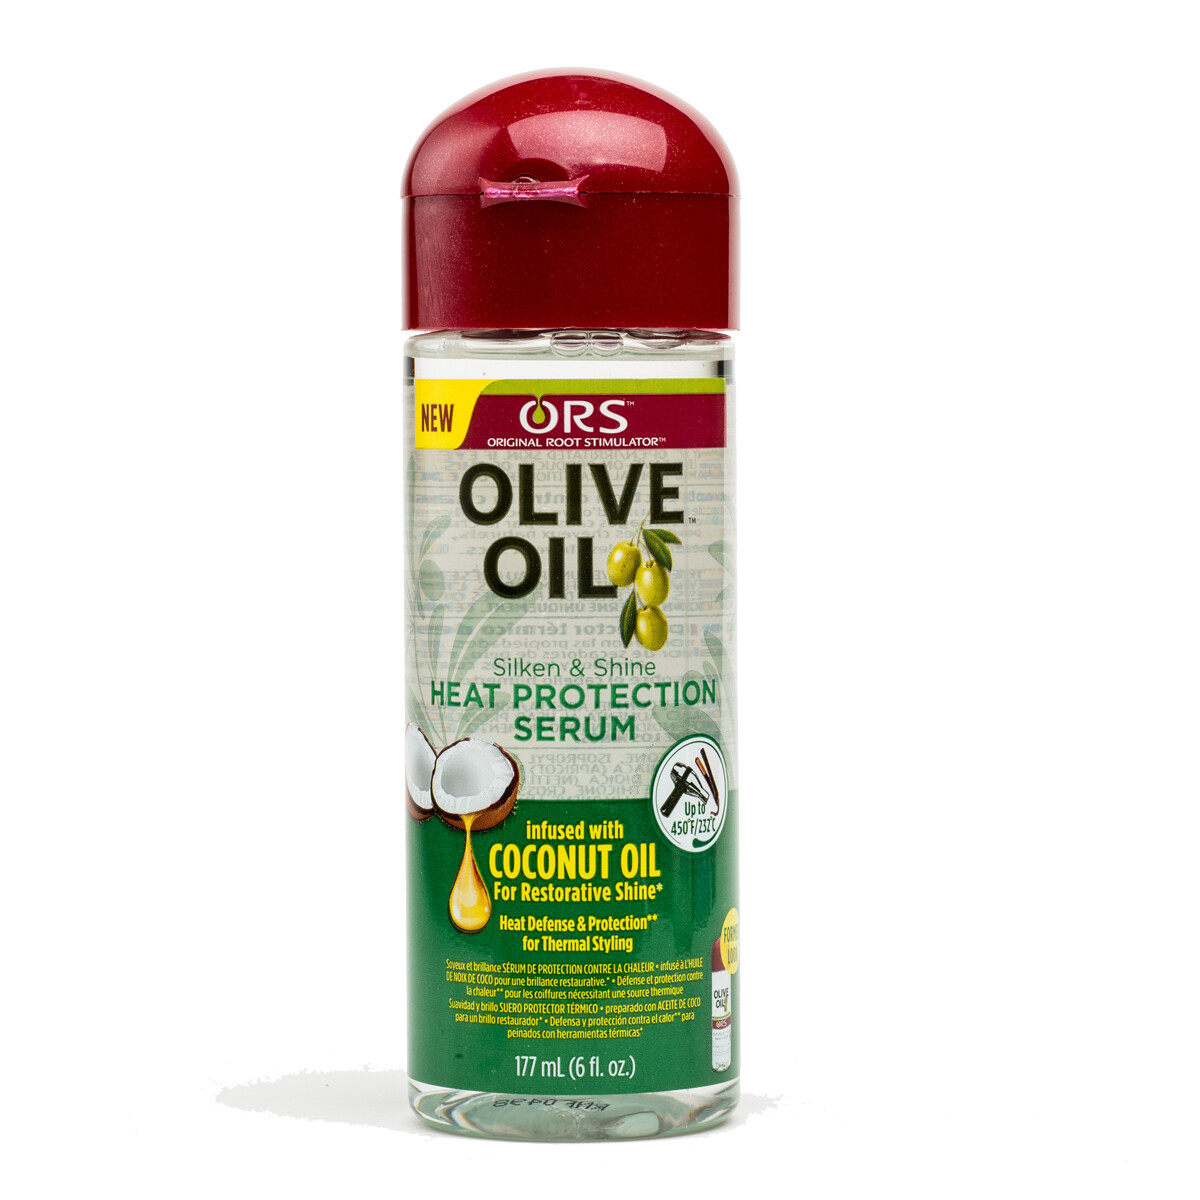 ORS Olive Oil Hair Heat Protection Serum ( 177.4ml )